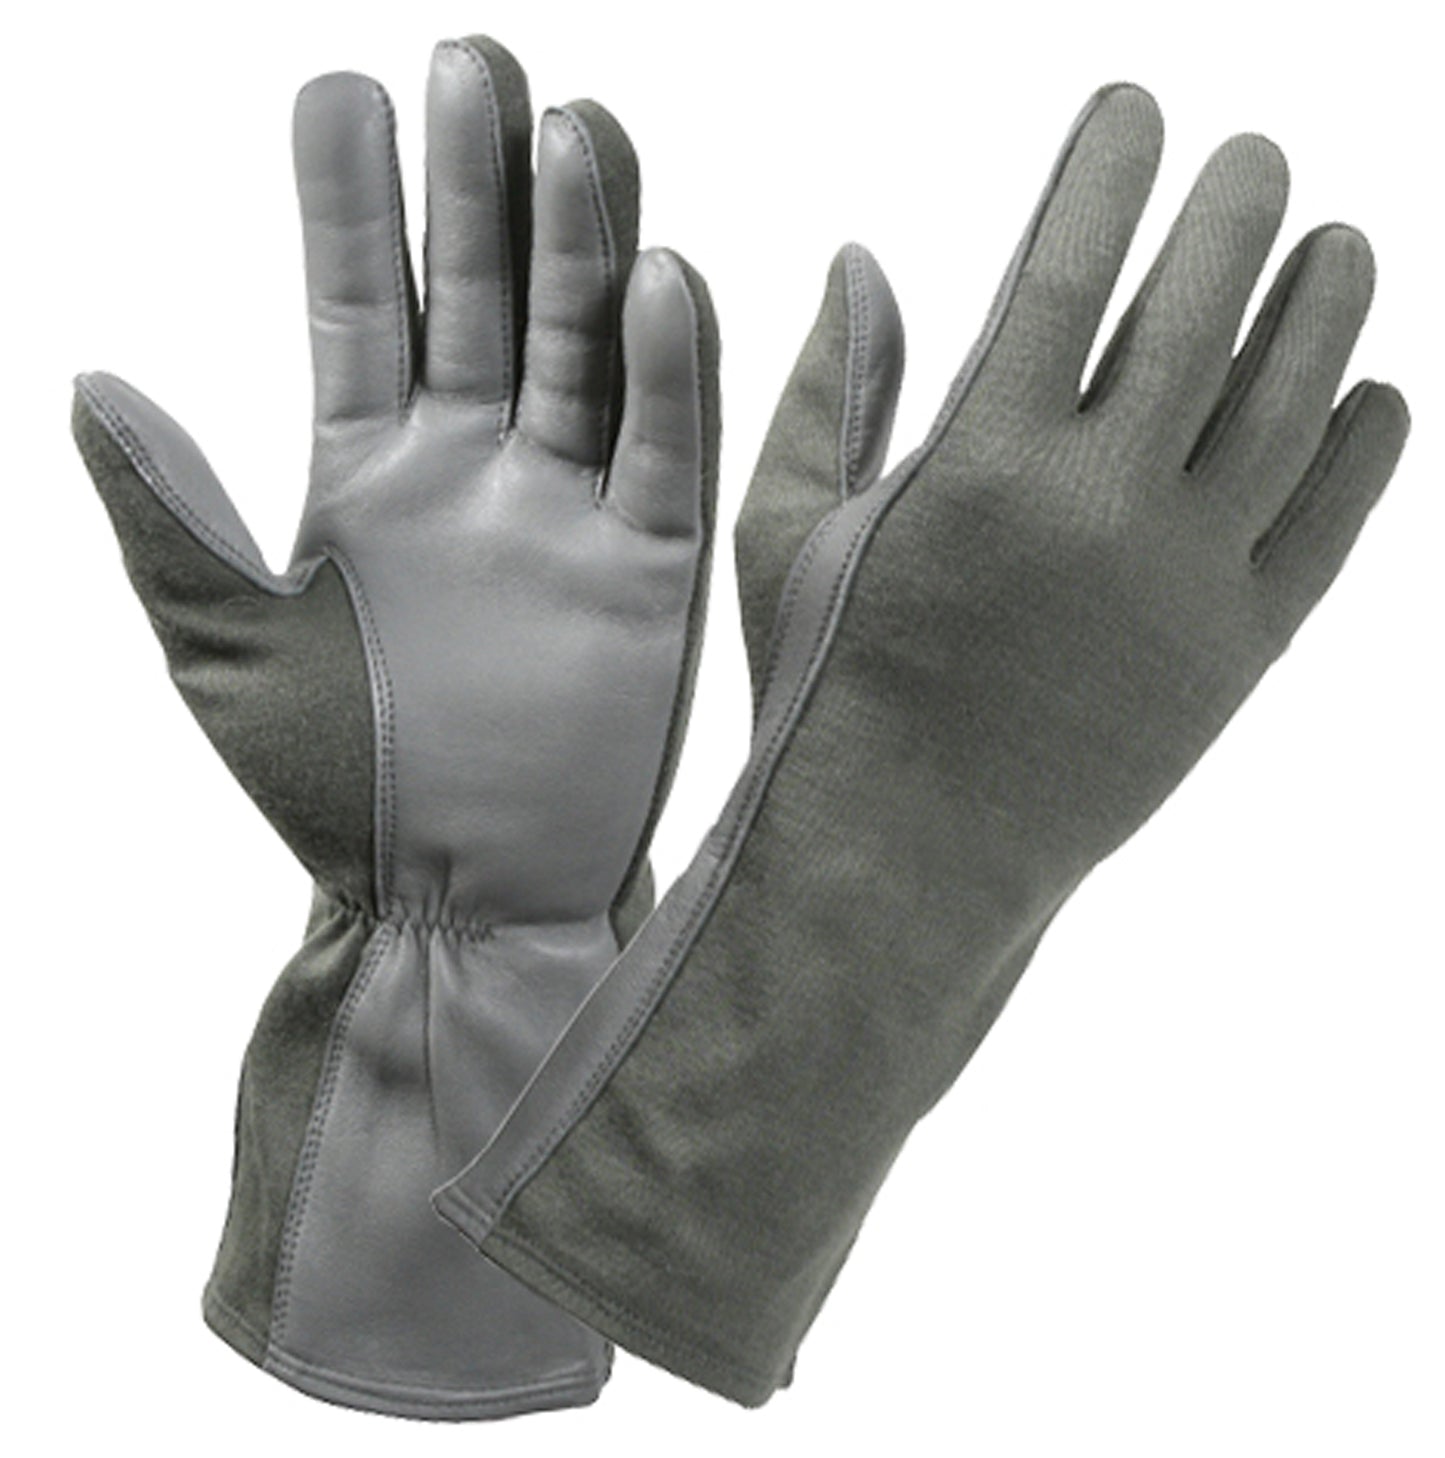 Milspec G.I. Type Flame & Heat Resistant Flight Gloves Holiday Closeout Deals MilTac Tactical Military Outdoor Gear Australia